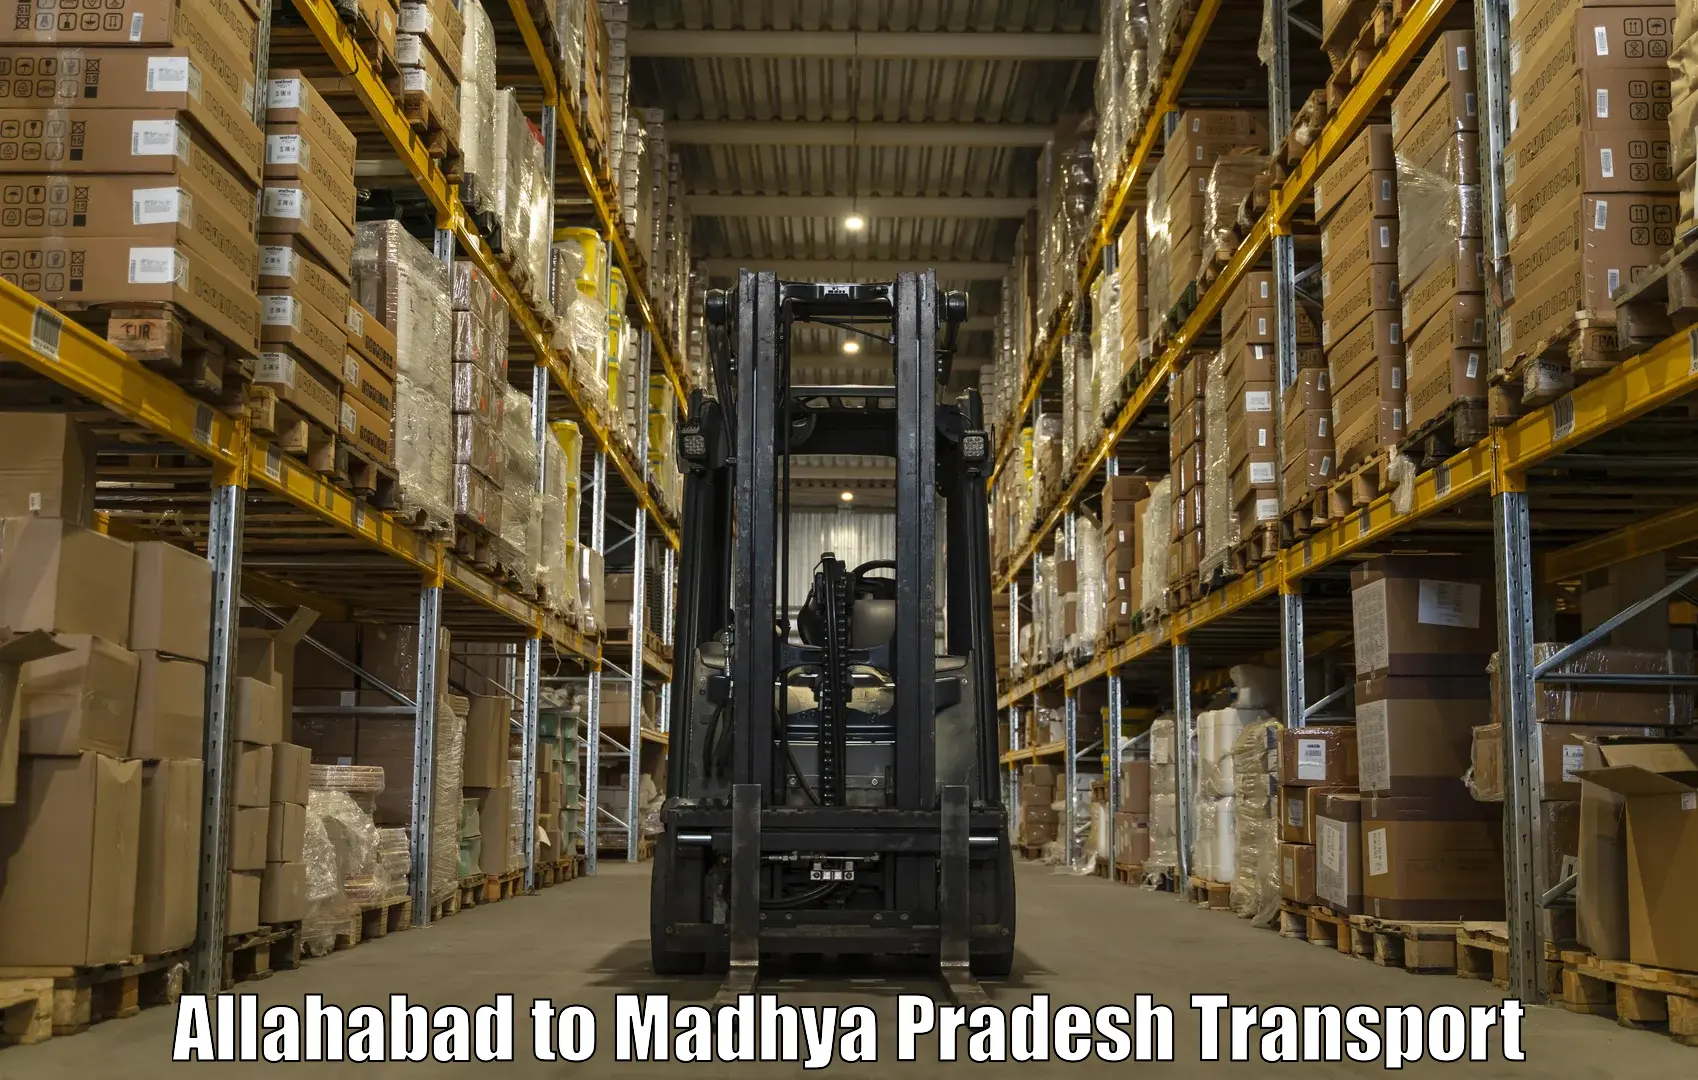 Domestic transport services Allahabad to Gwalior